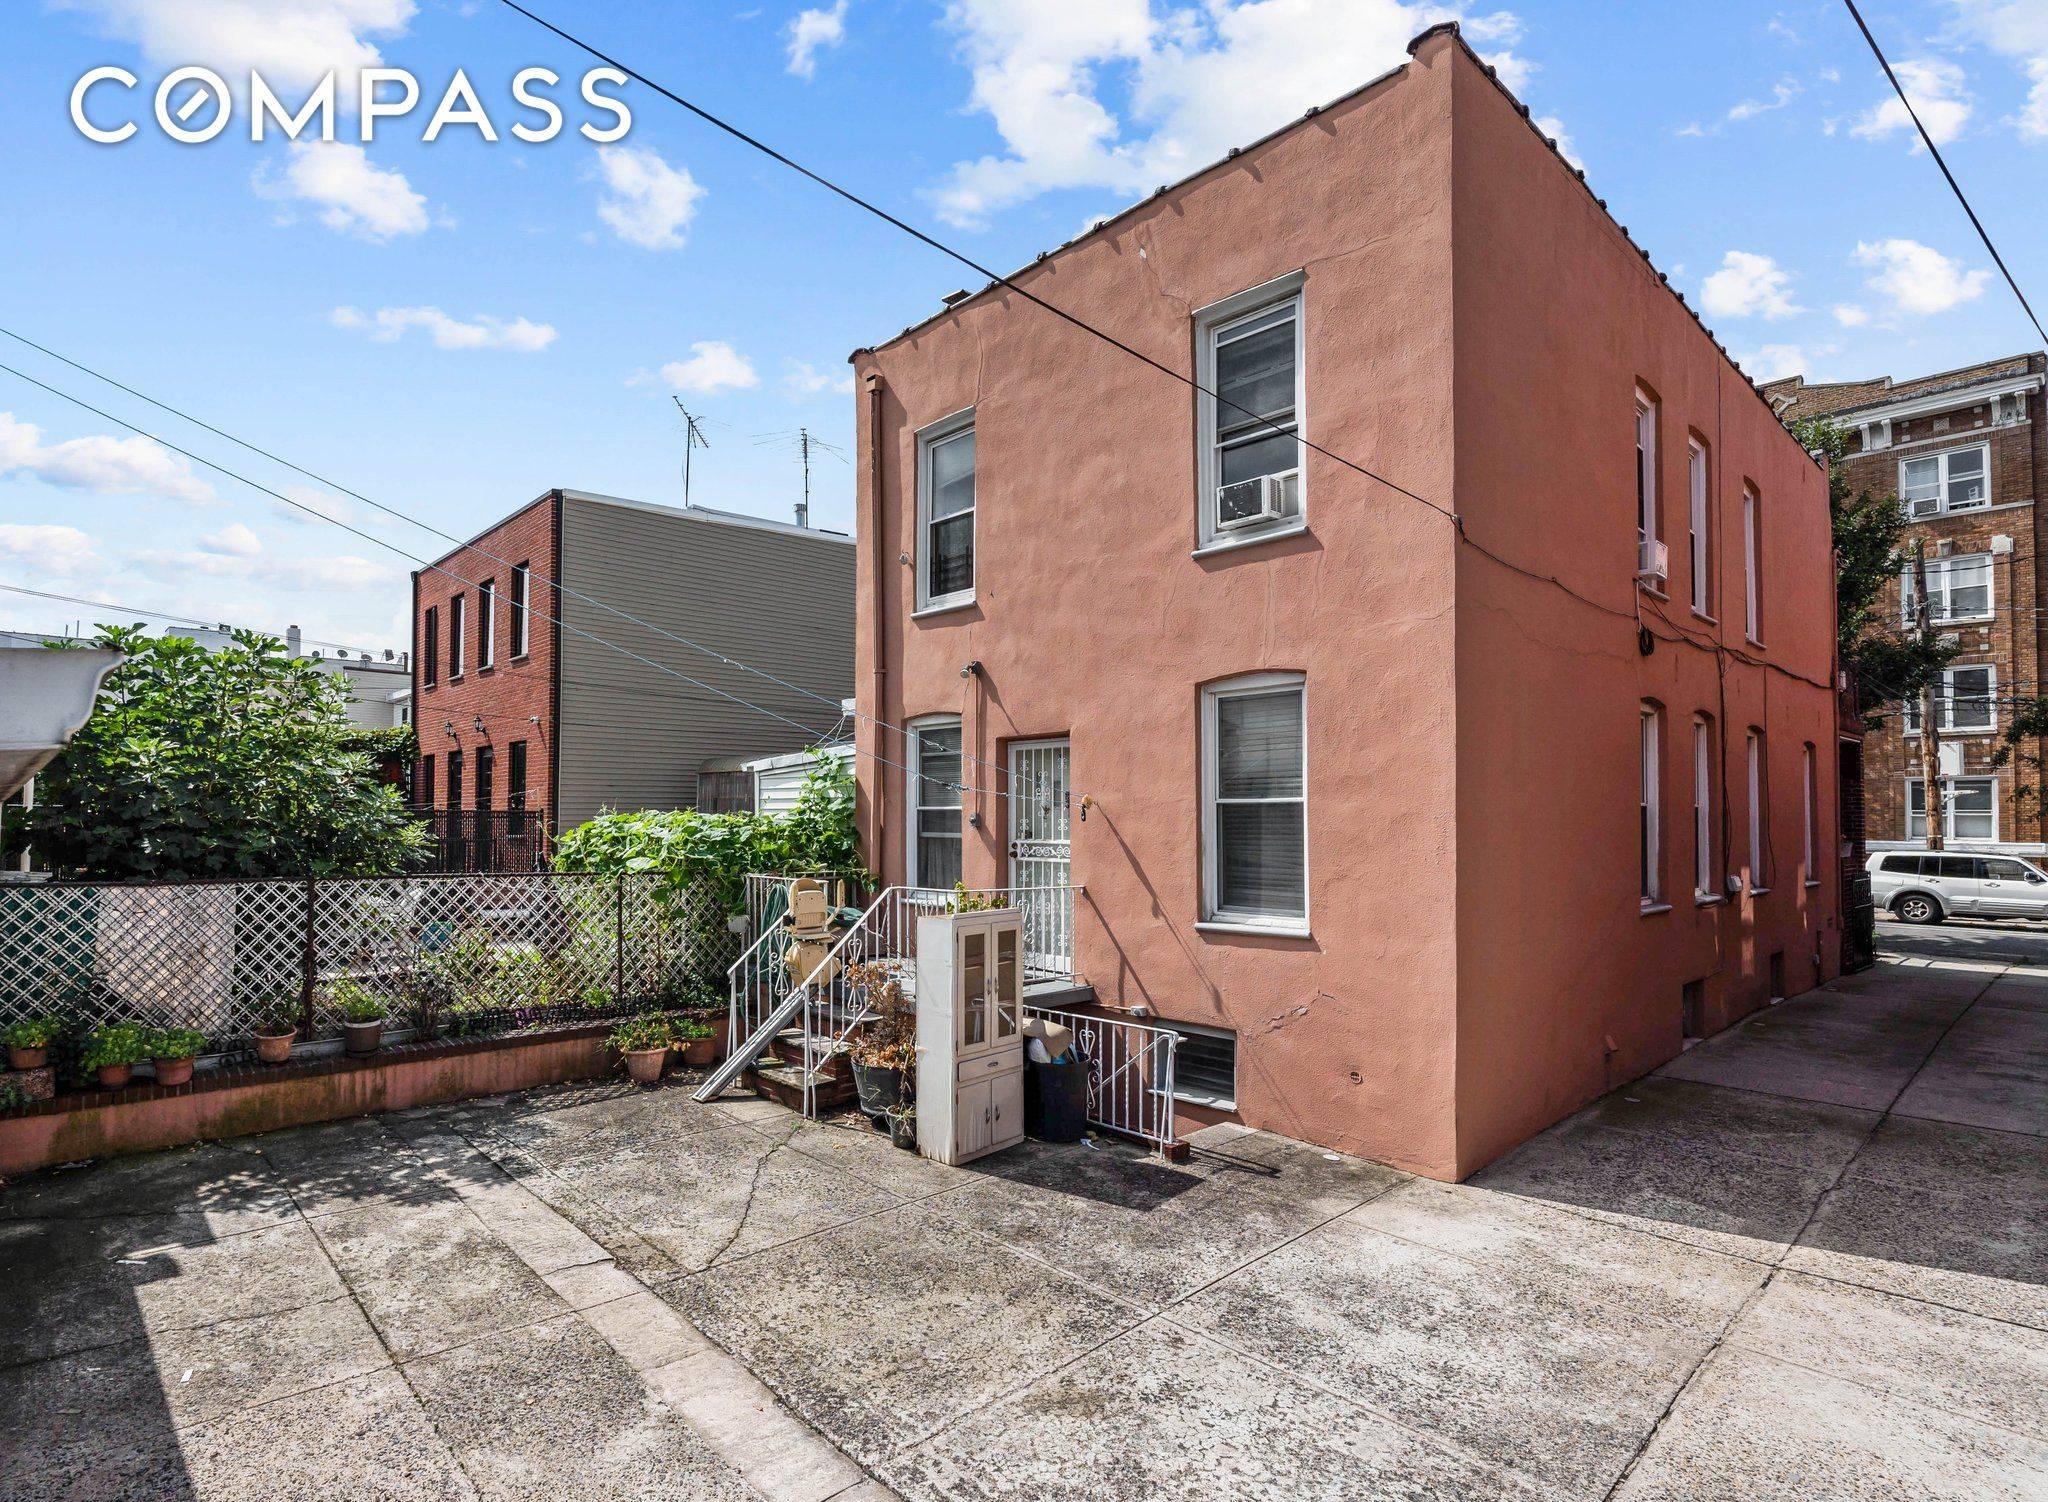 We are excited to present this large semi detached brick two family home for sale in Astoria !